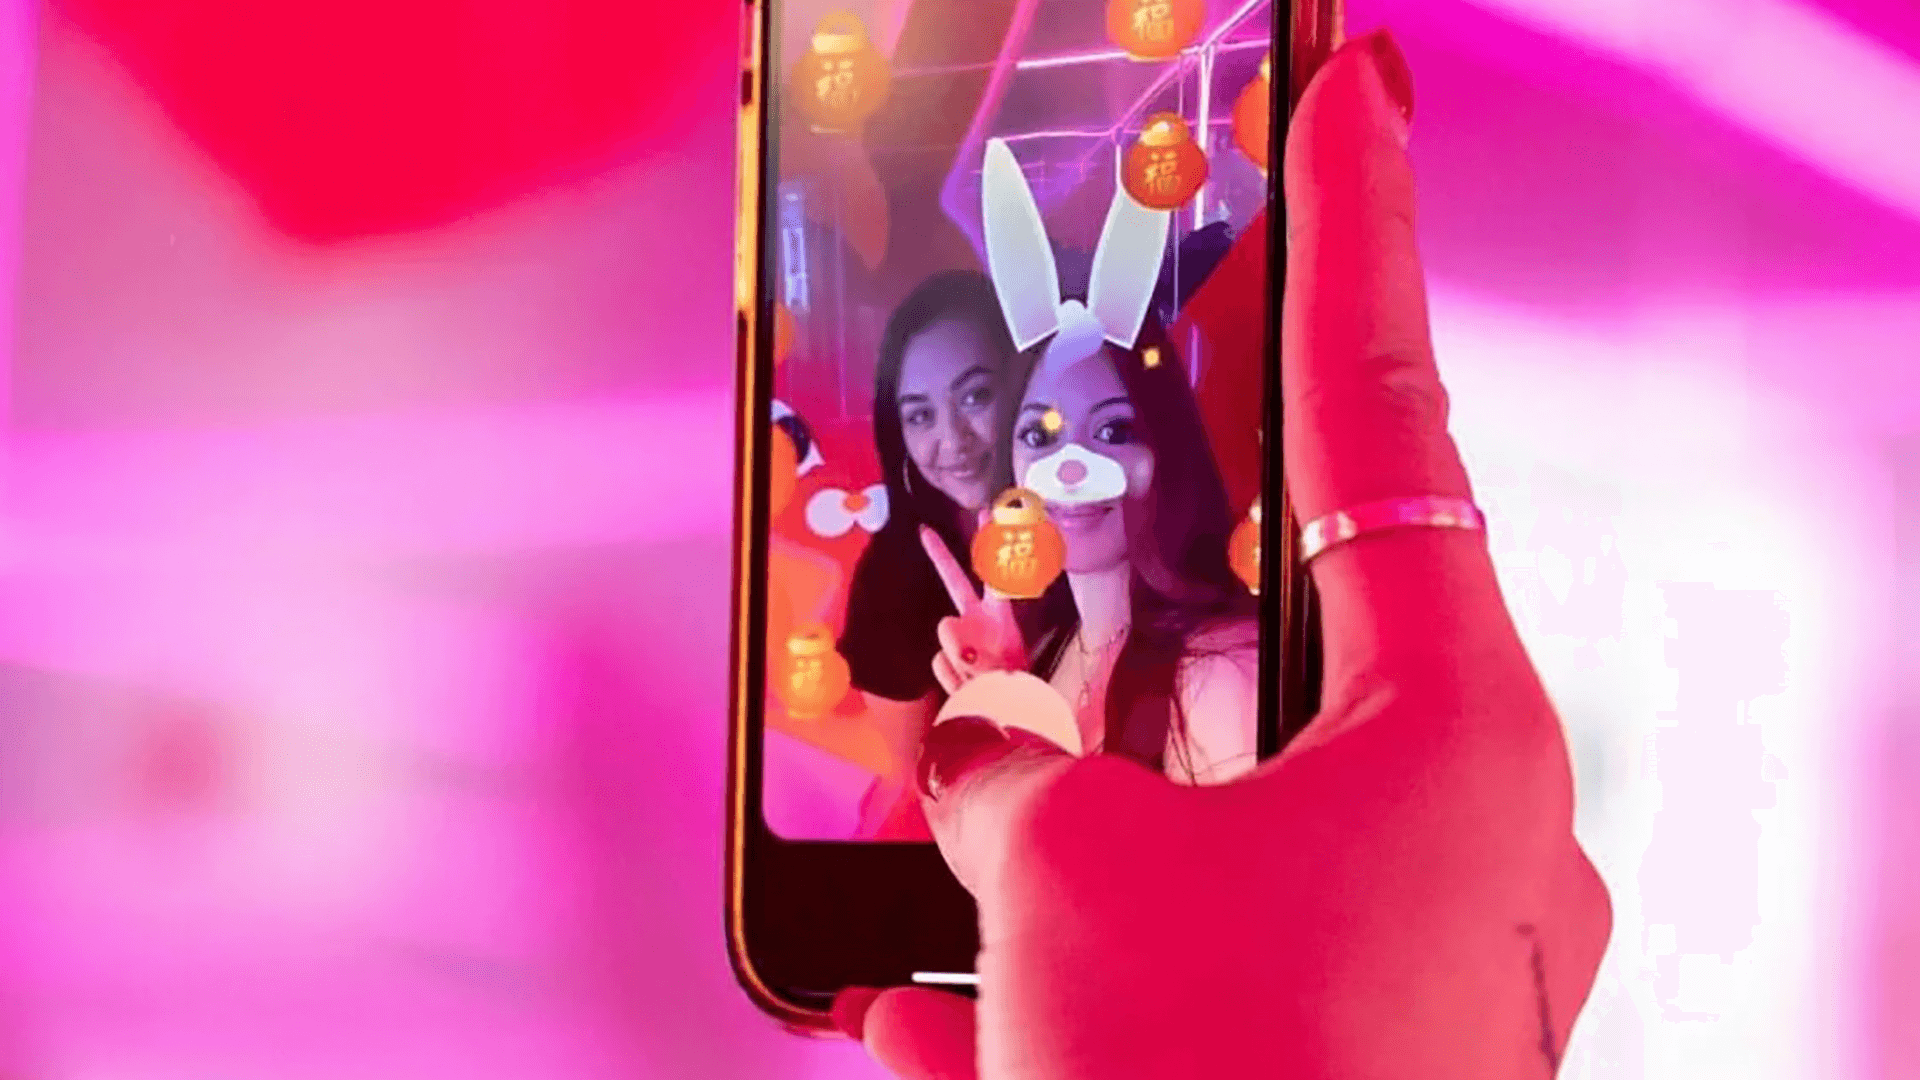 A phone selfie depicting 2 women inside the Lucky Lunar experiential brand activation installation at World Square Sydney for Lunar New Year adorned with VFX rabbit face filters 